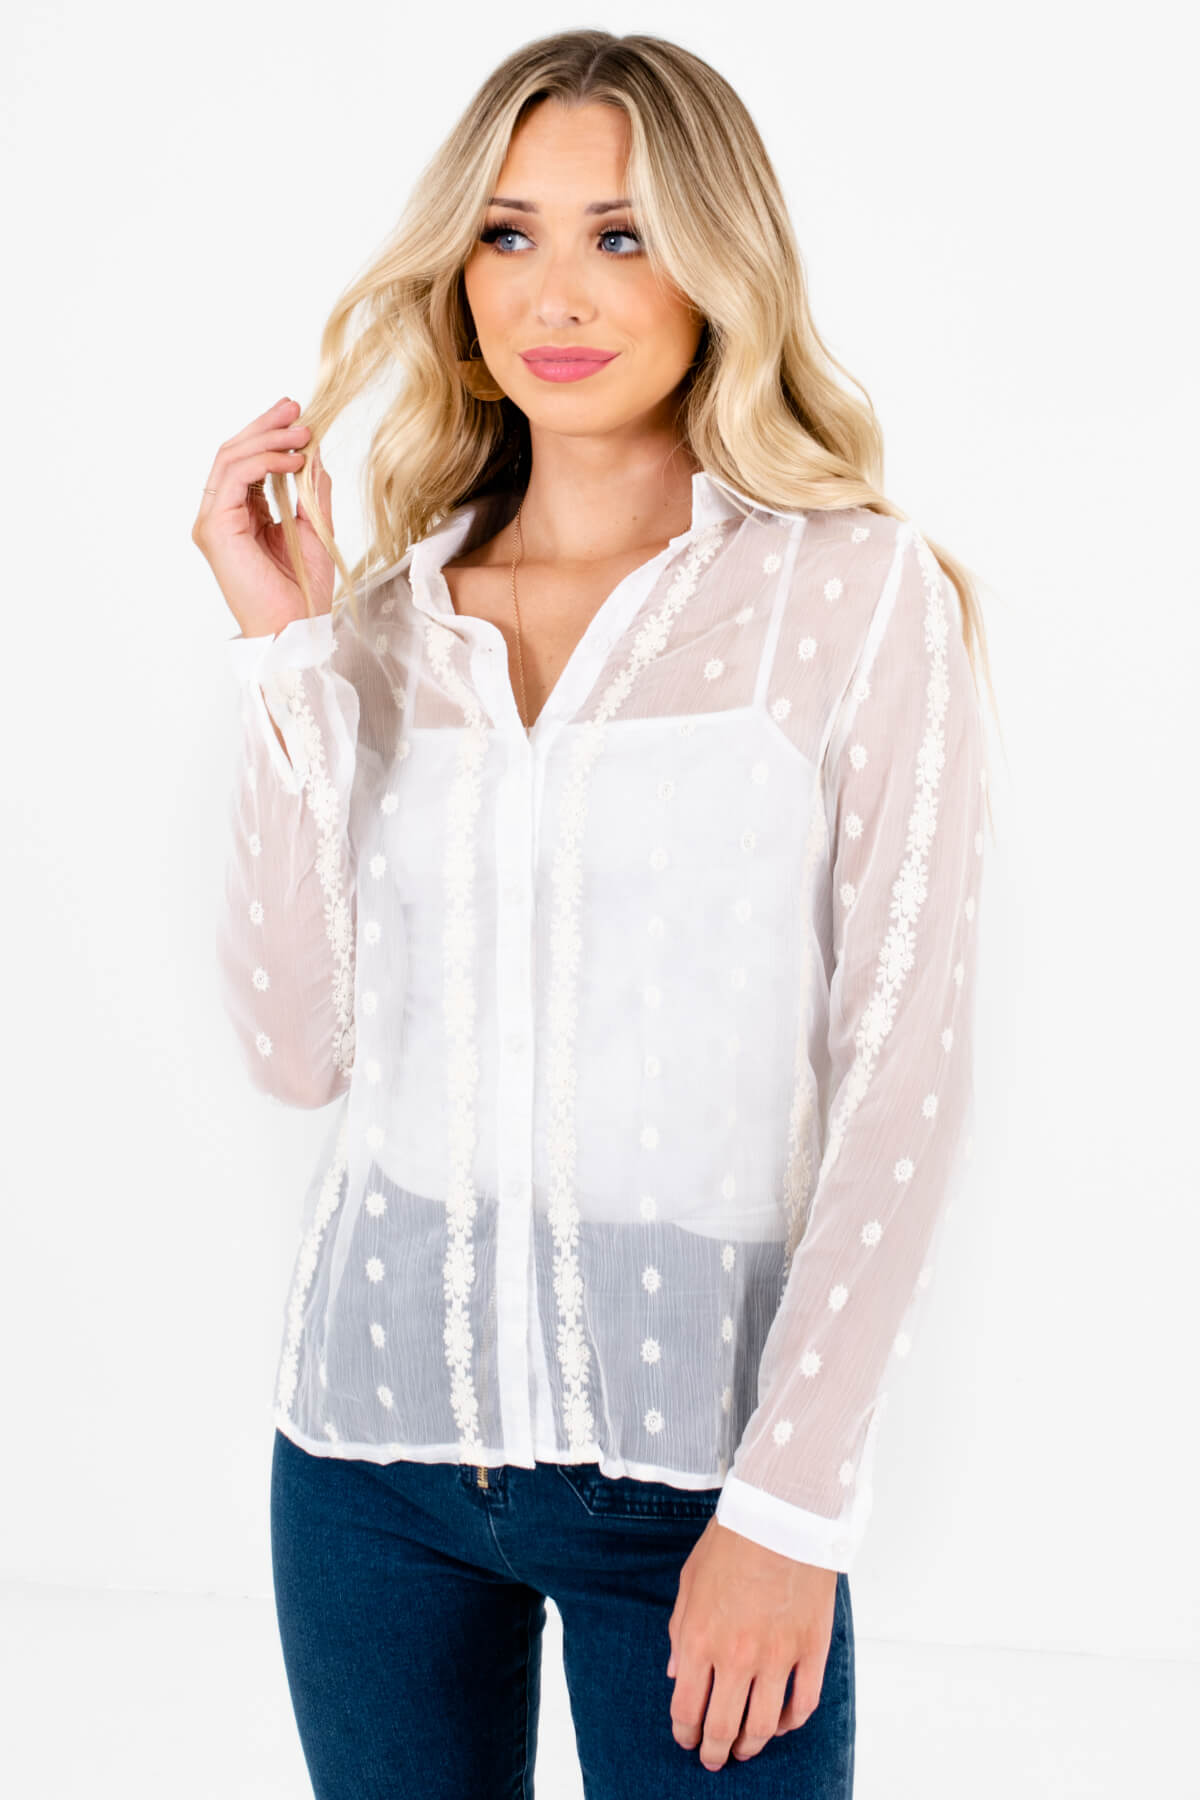 White Embroidered Semi-Sheer Button-Up Shirts for Women